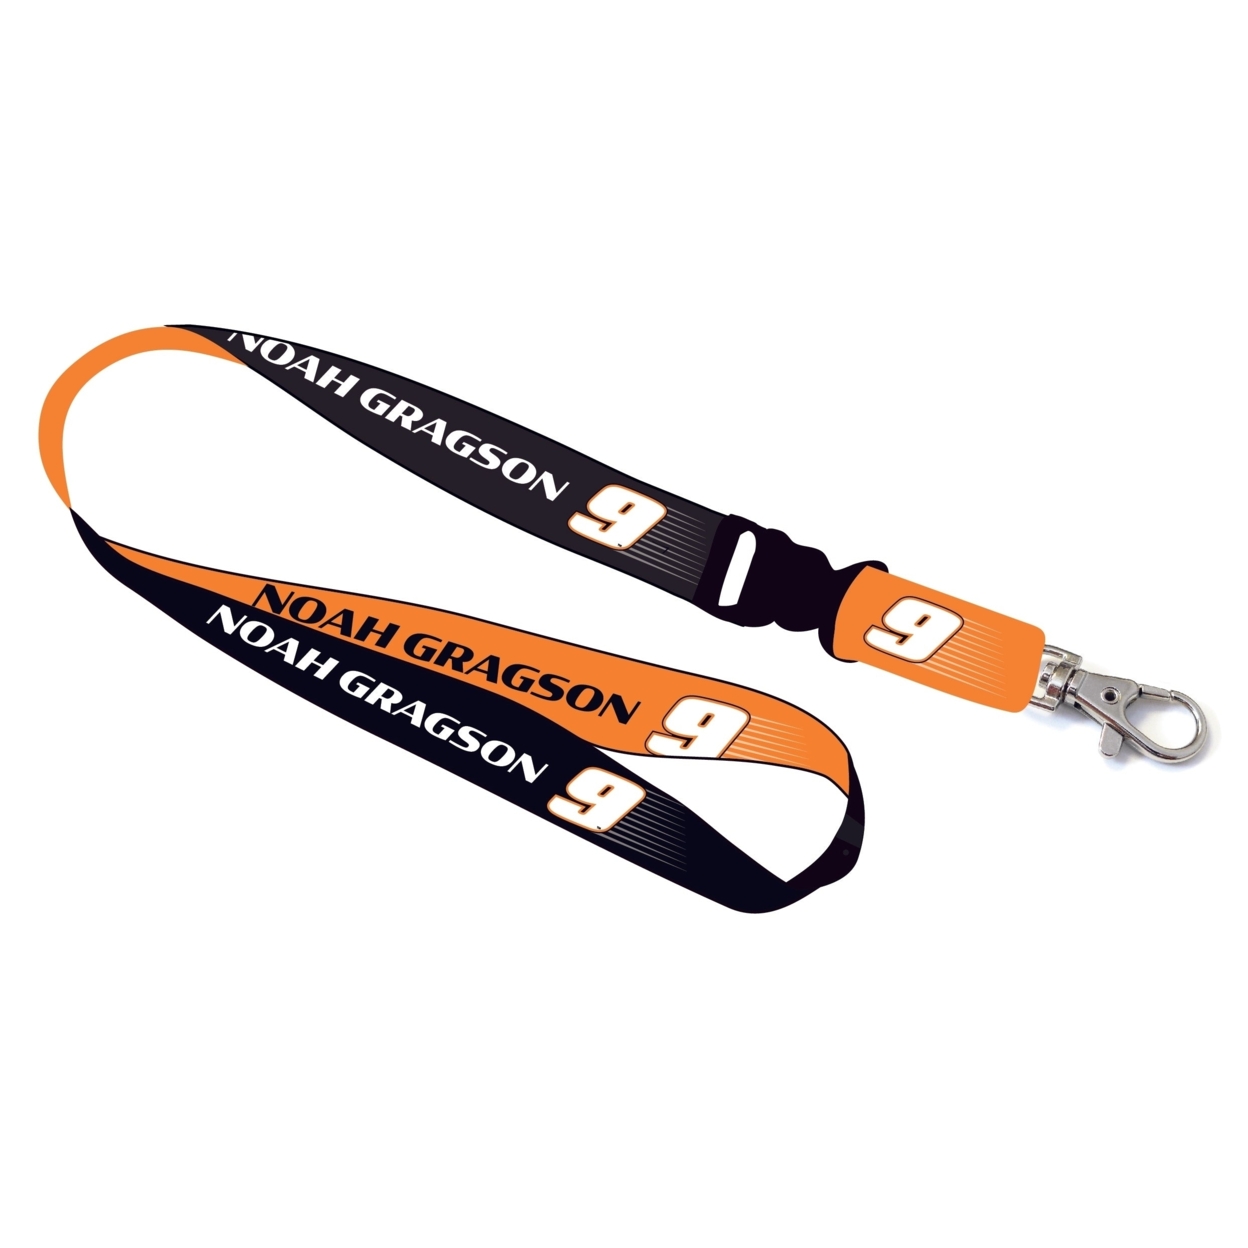 Noah Gragson #9 NASCAR Cup Series Lanyard New For 2021